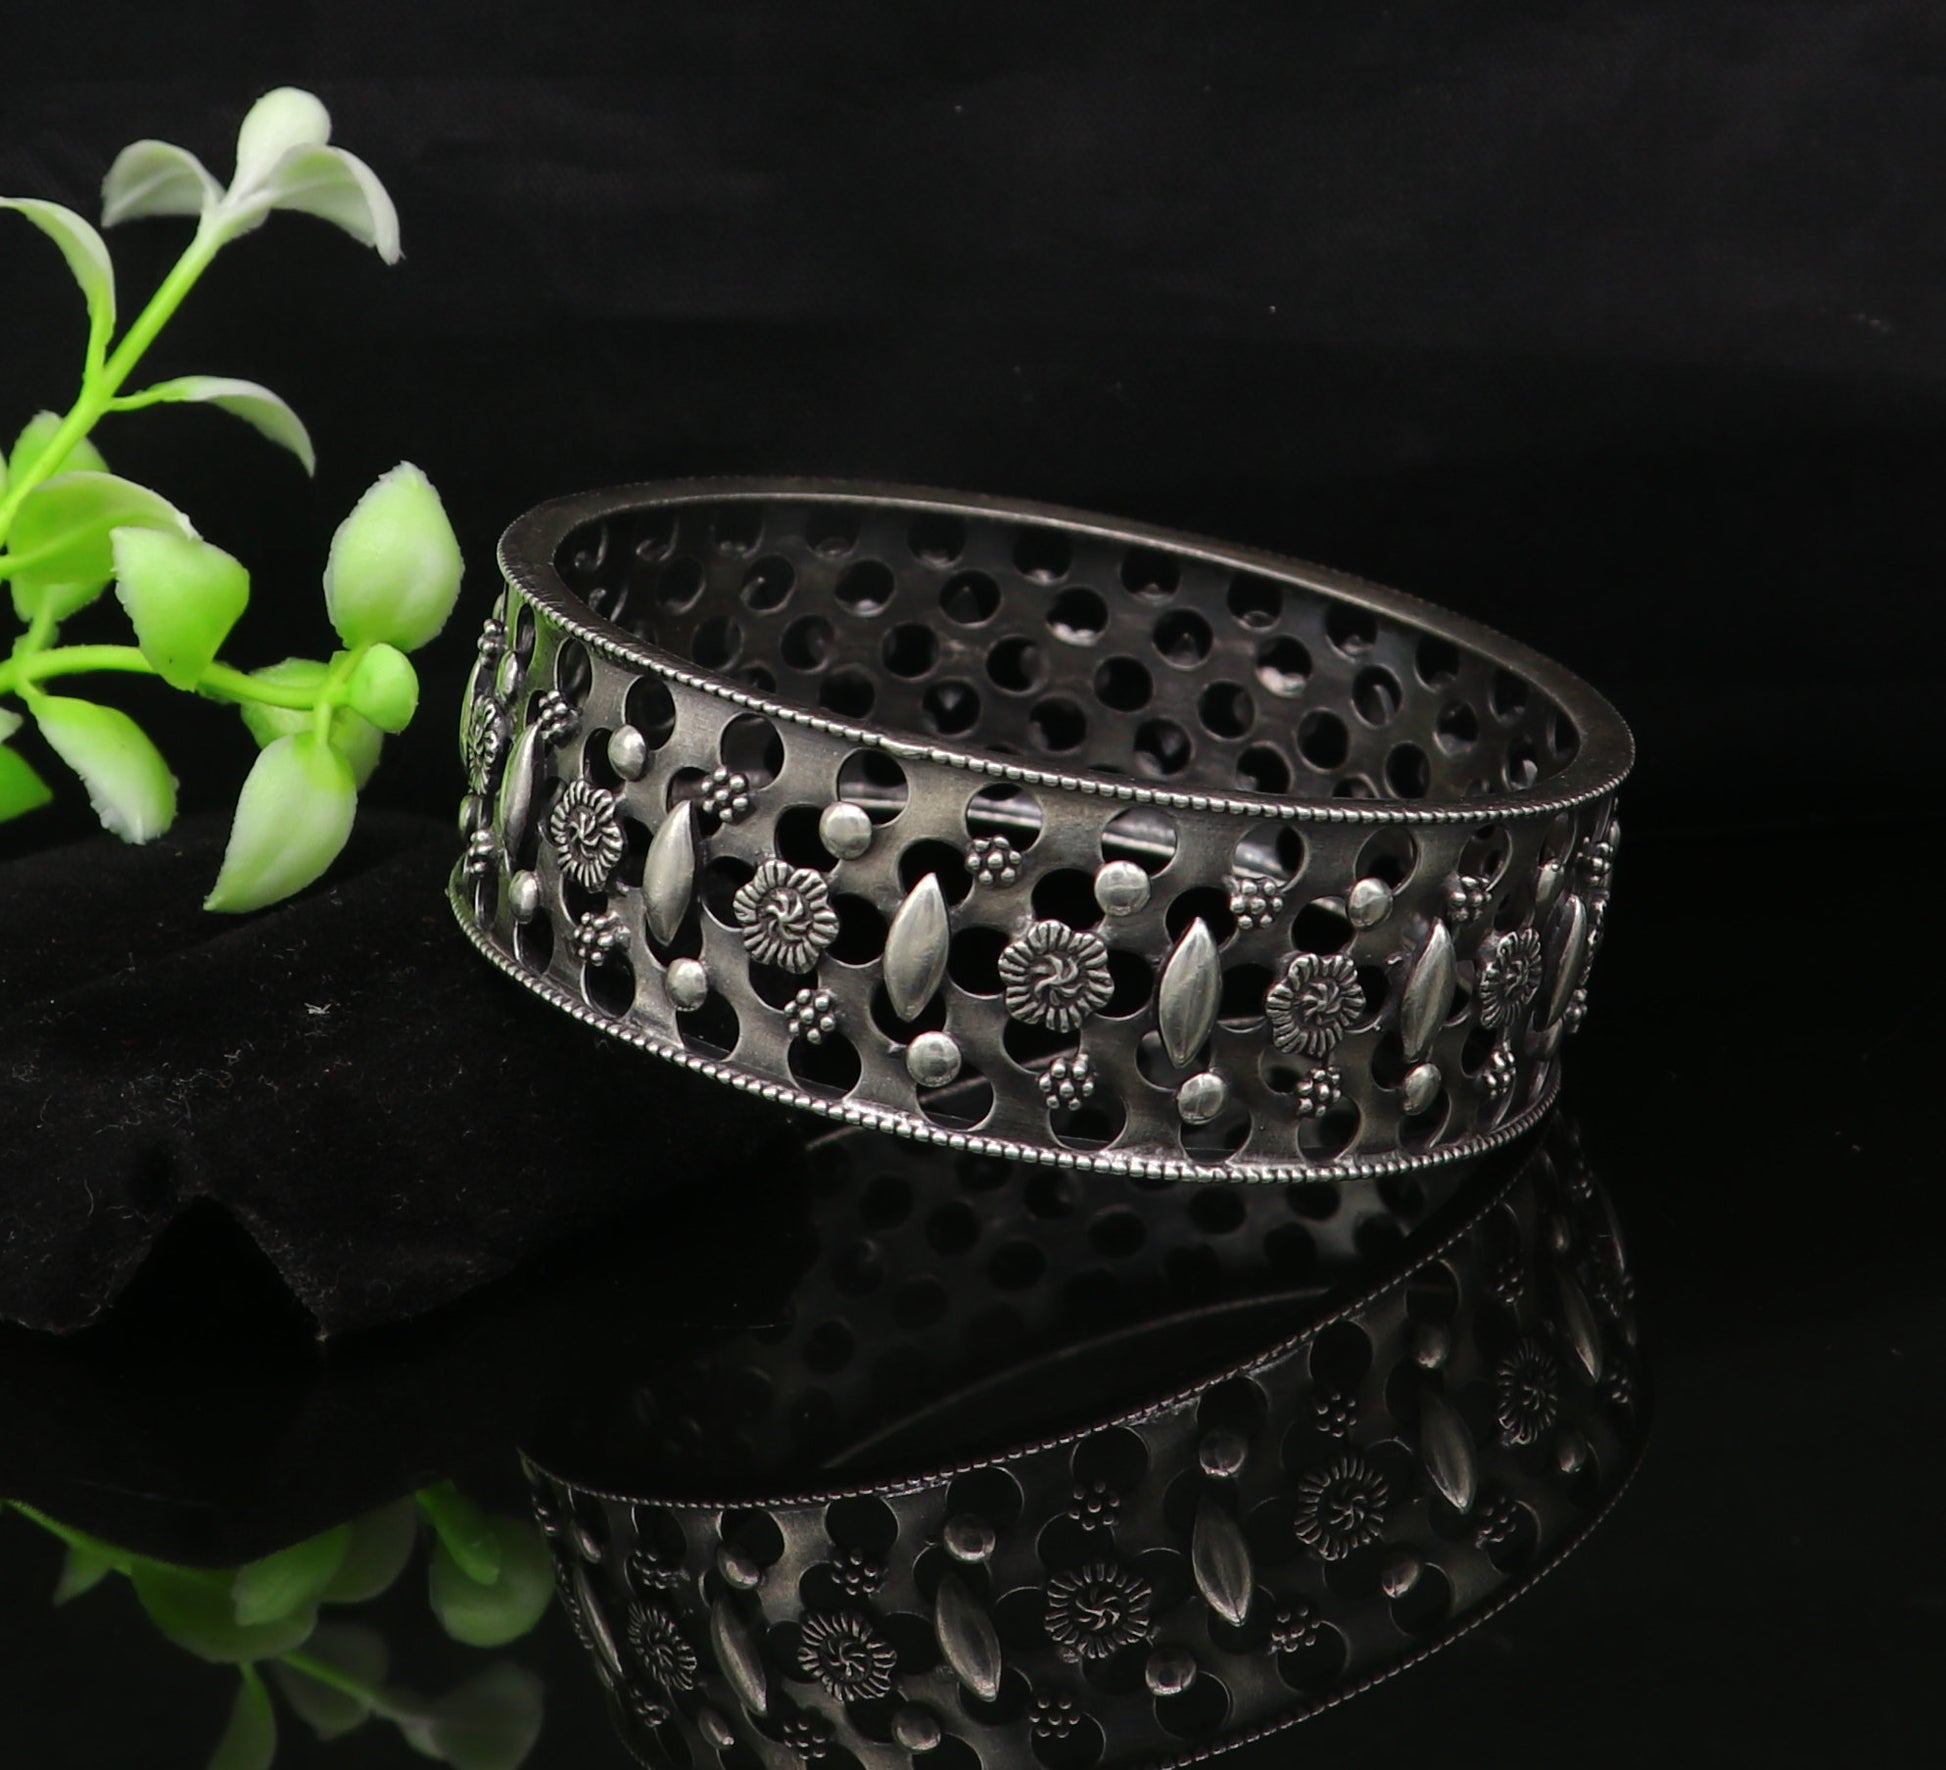 925 sterling silver vintage style handcrafted flower design kada bangle bracelet tribal wedding jewelry for girl's from india ba98 - TRIBAL ORNAMENTS